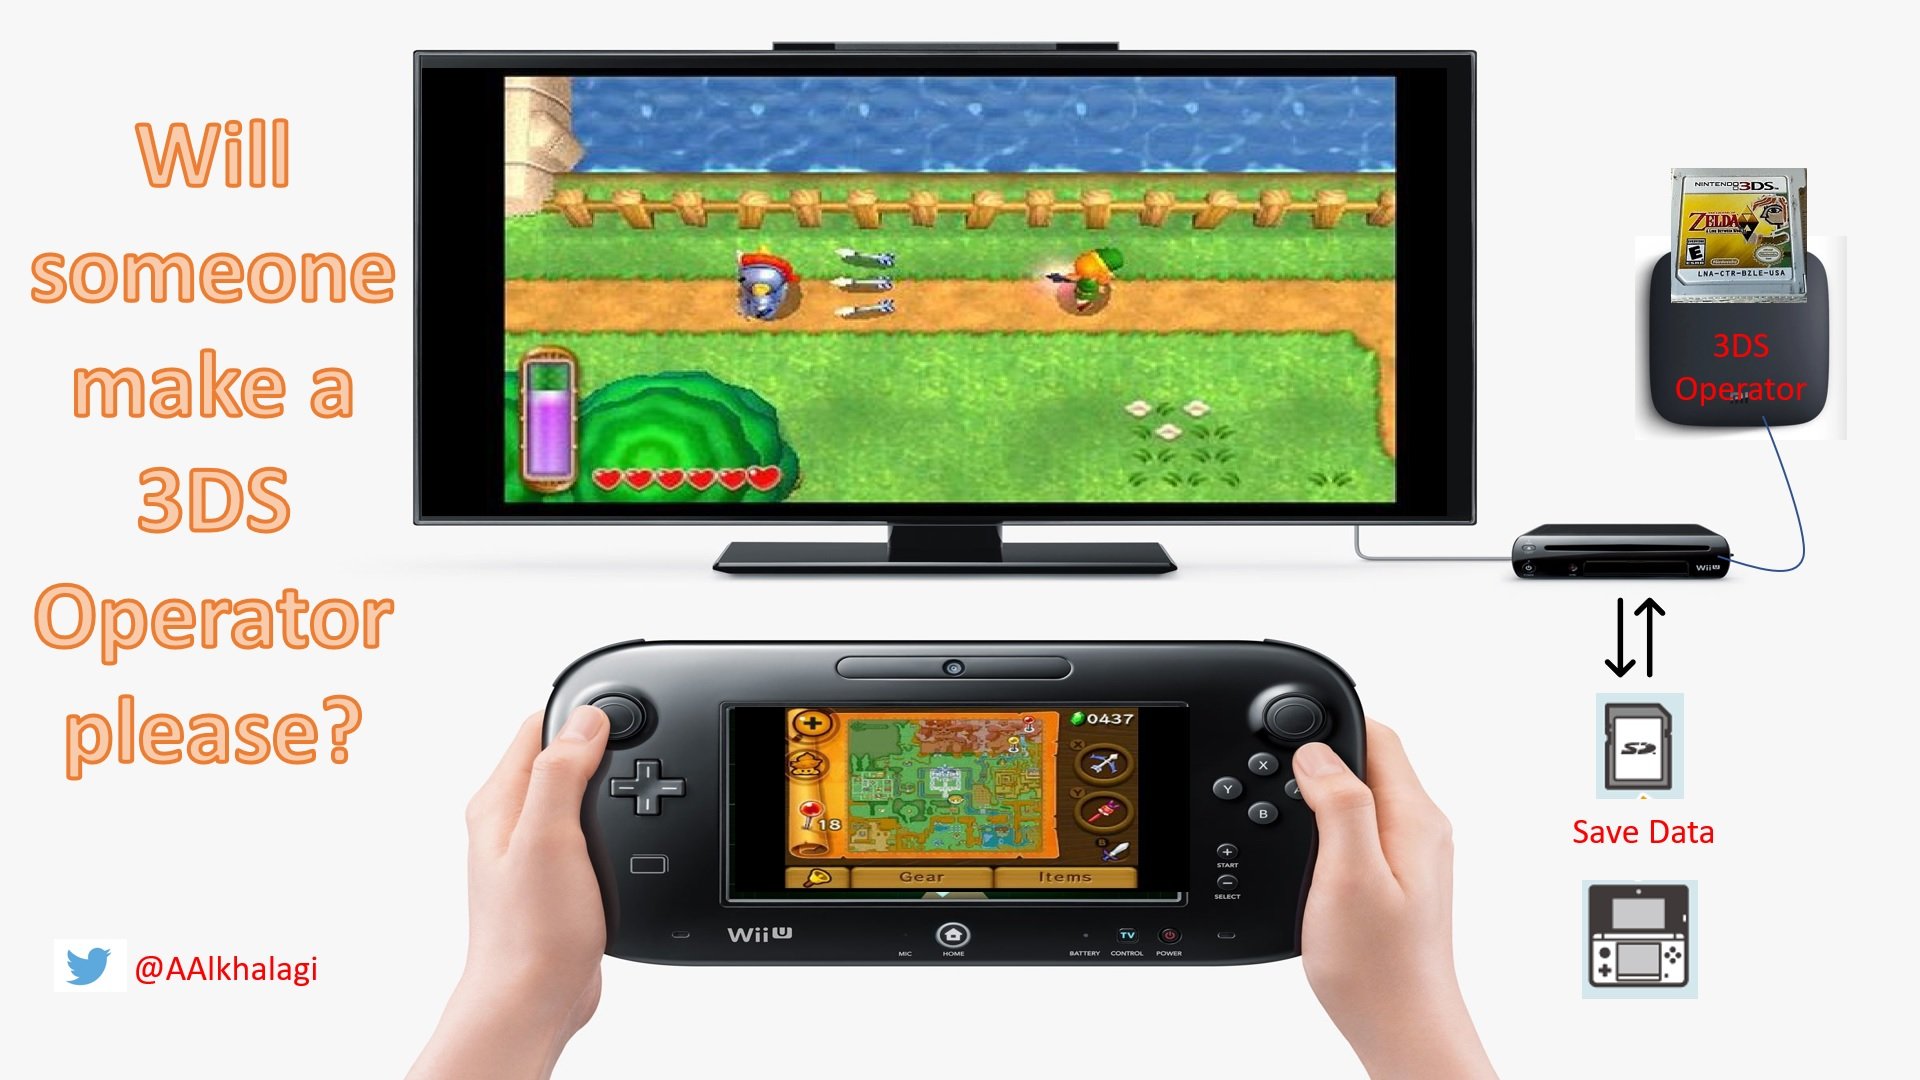 Depender de Restringir batalla Can someone make this DREAM true for 3ds and WiiU? | GBAtemp.net - The  Independent Video Game Community